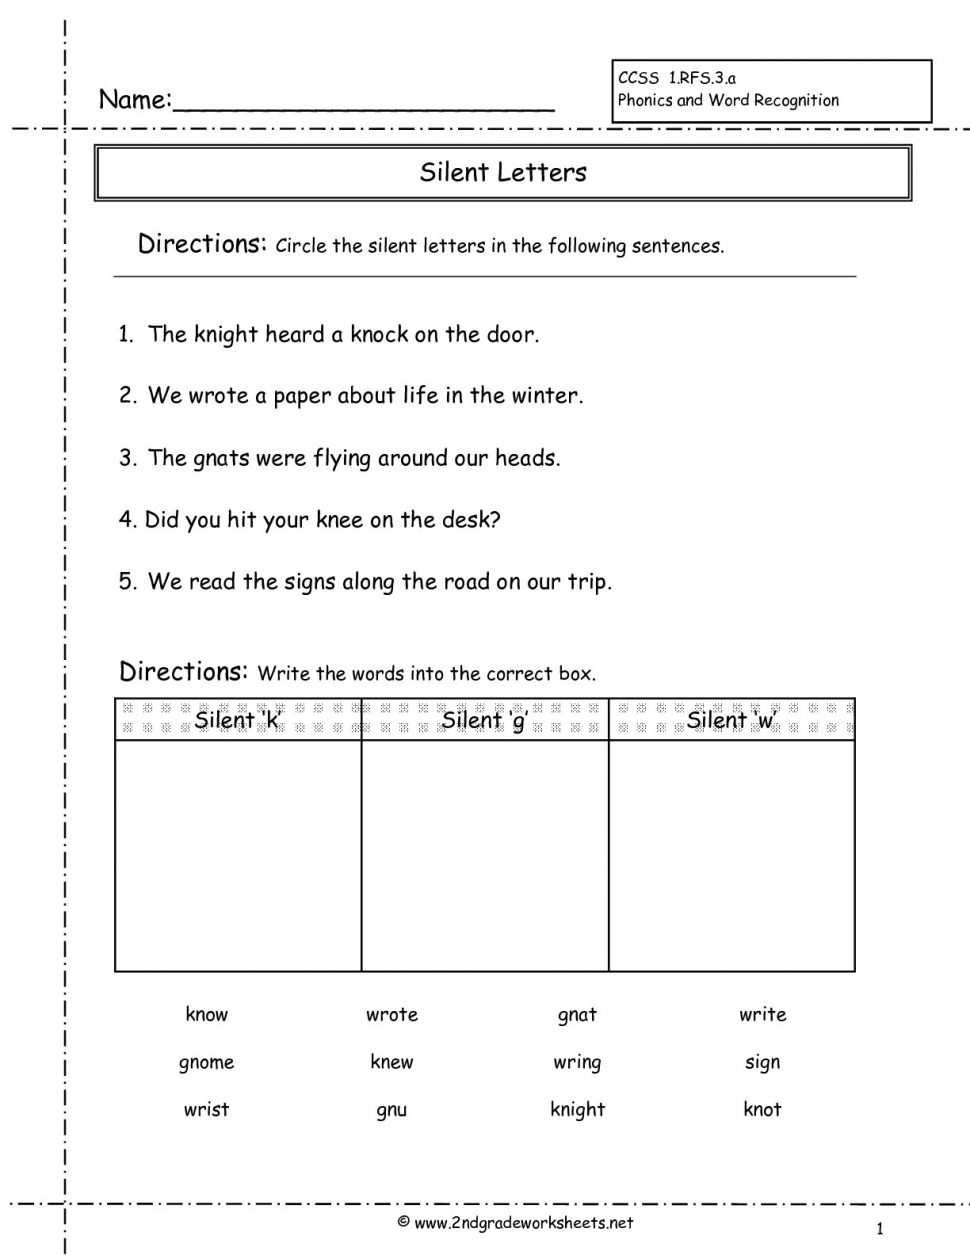 Worksheet : Second Grade Phonics Worksheets And Flashcards Silent - Free Printable Phonics Worksheets For Second Grade